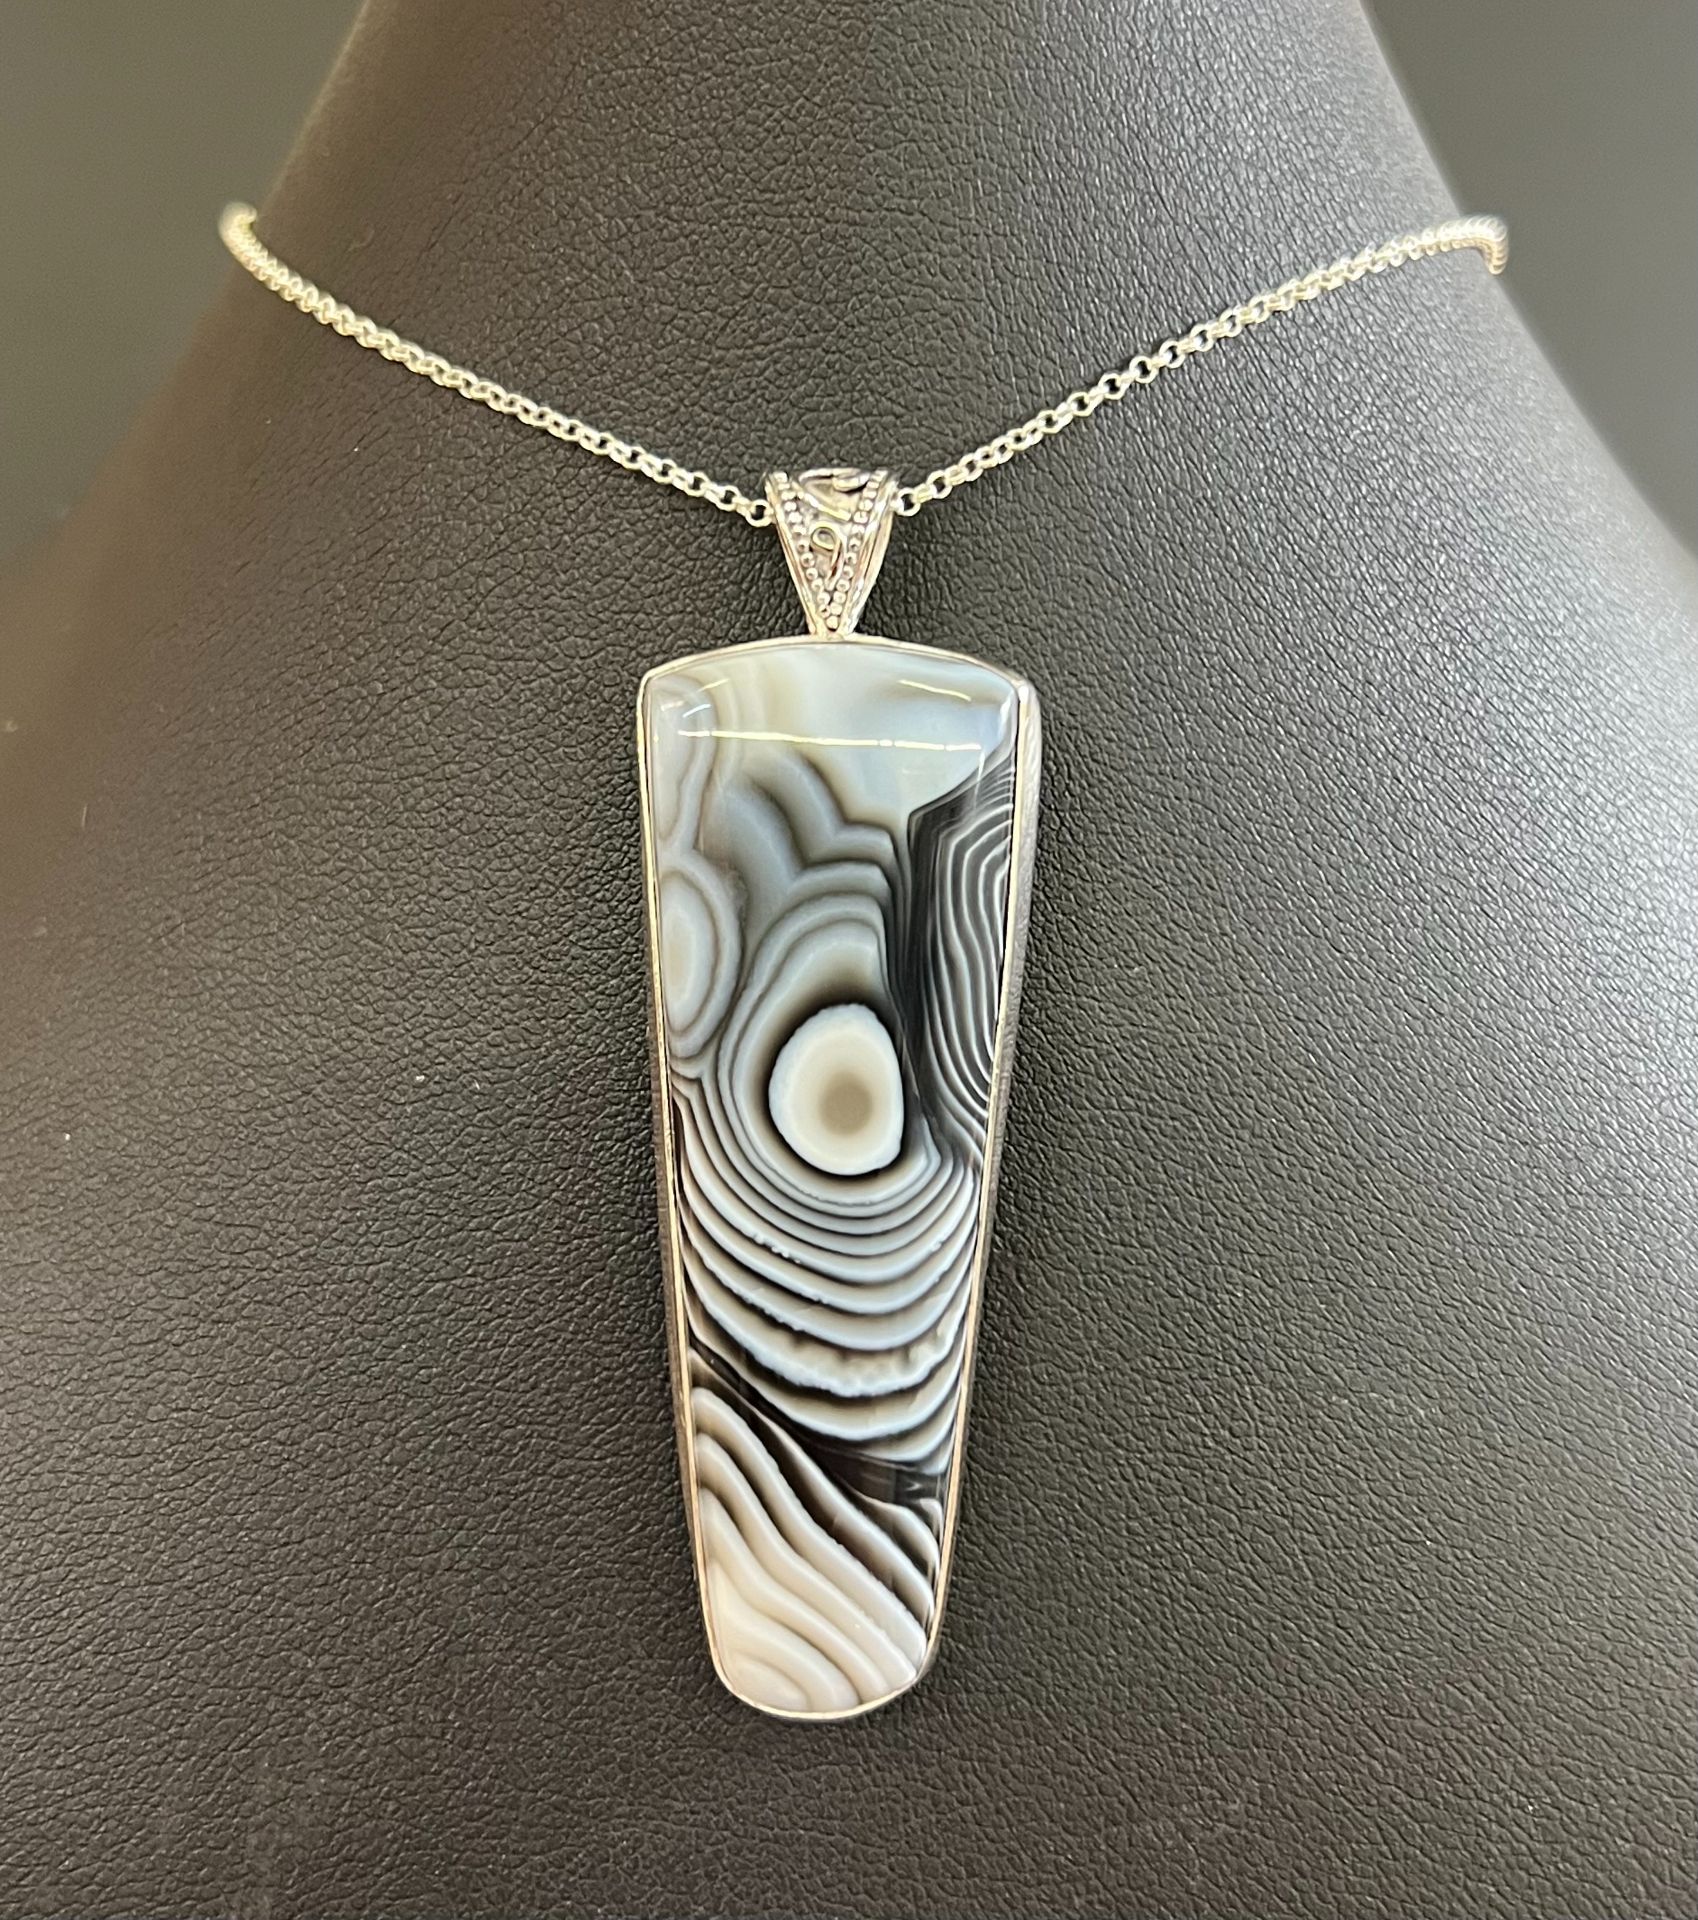 Black and white pendant on a black display.